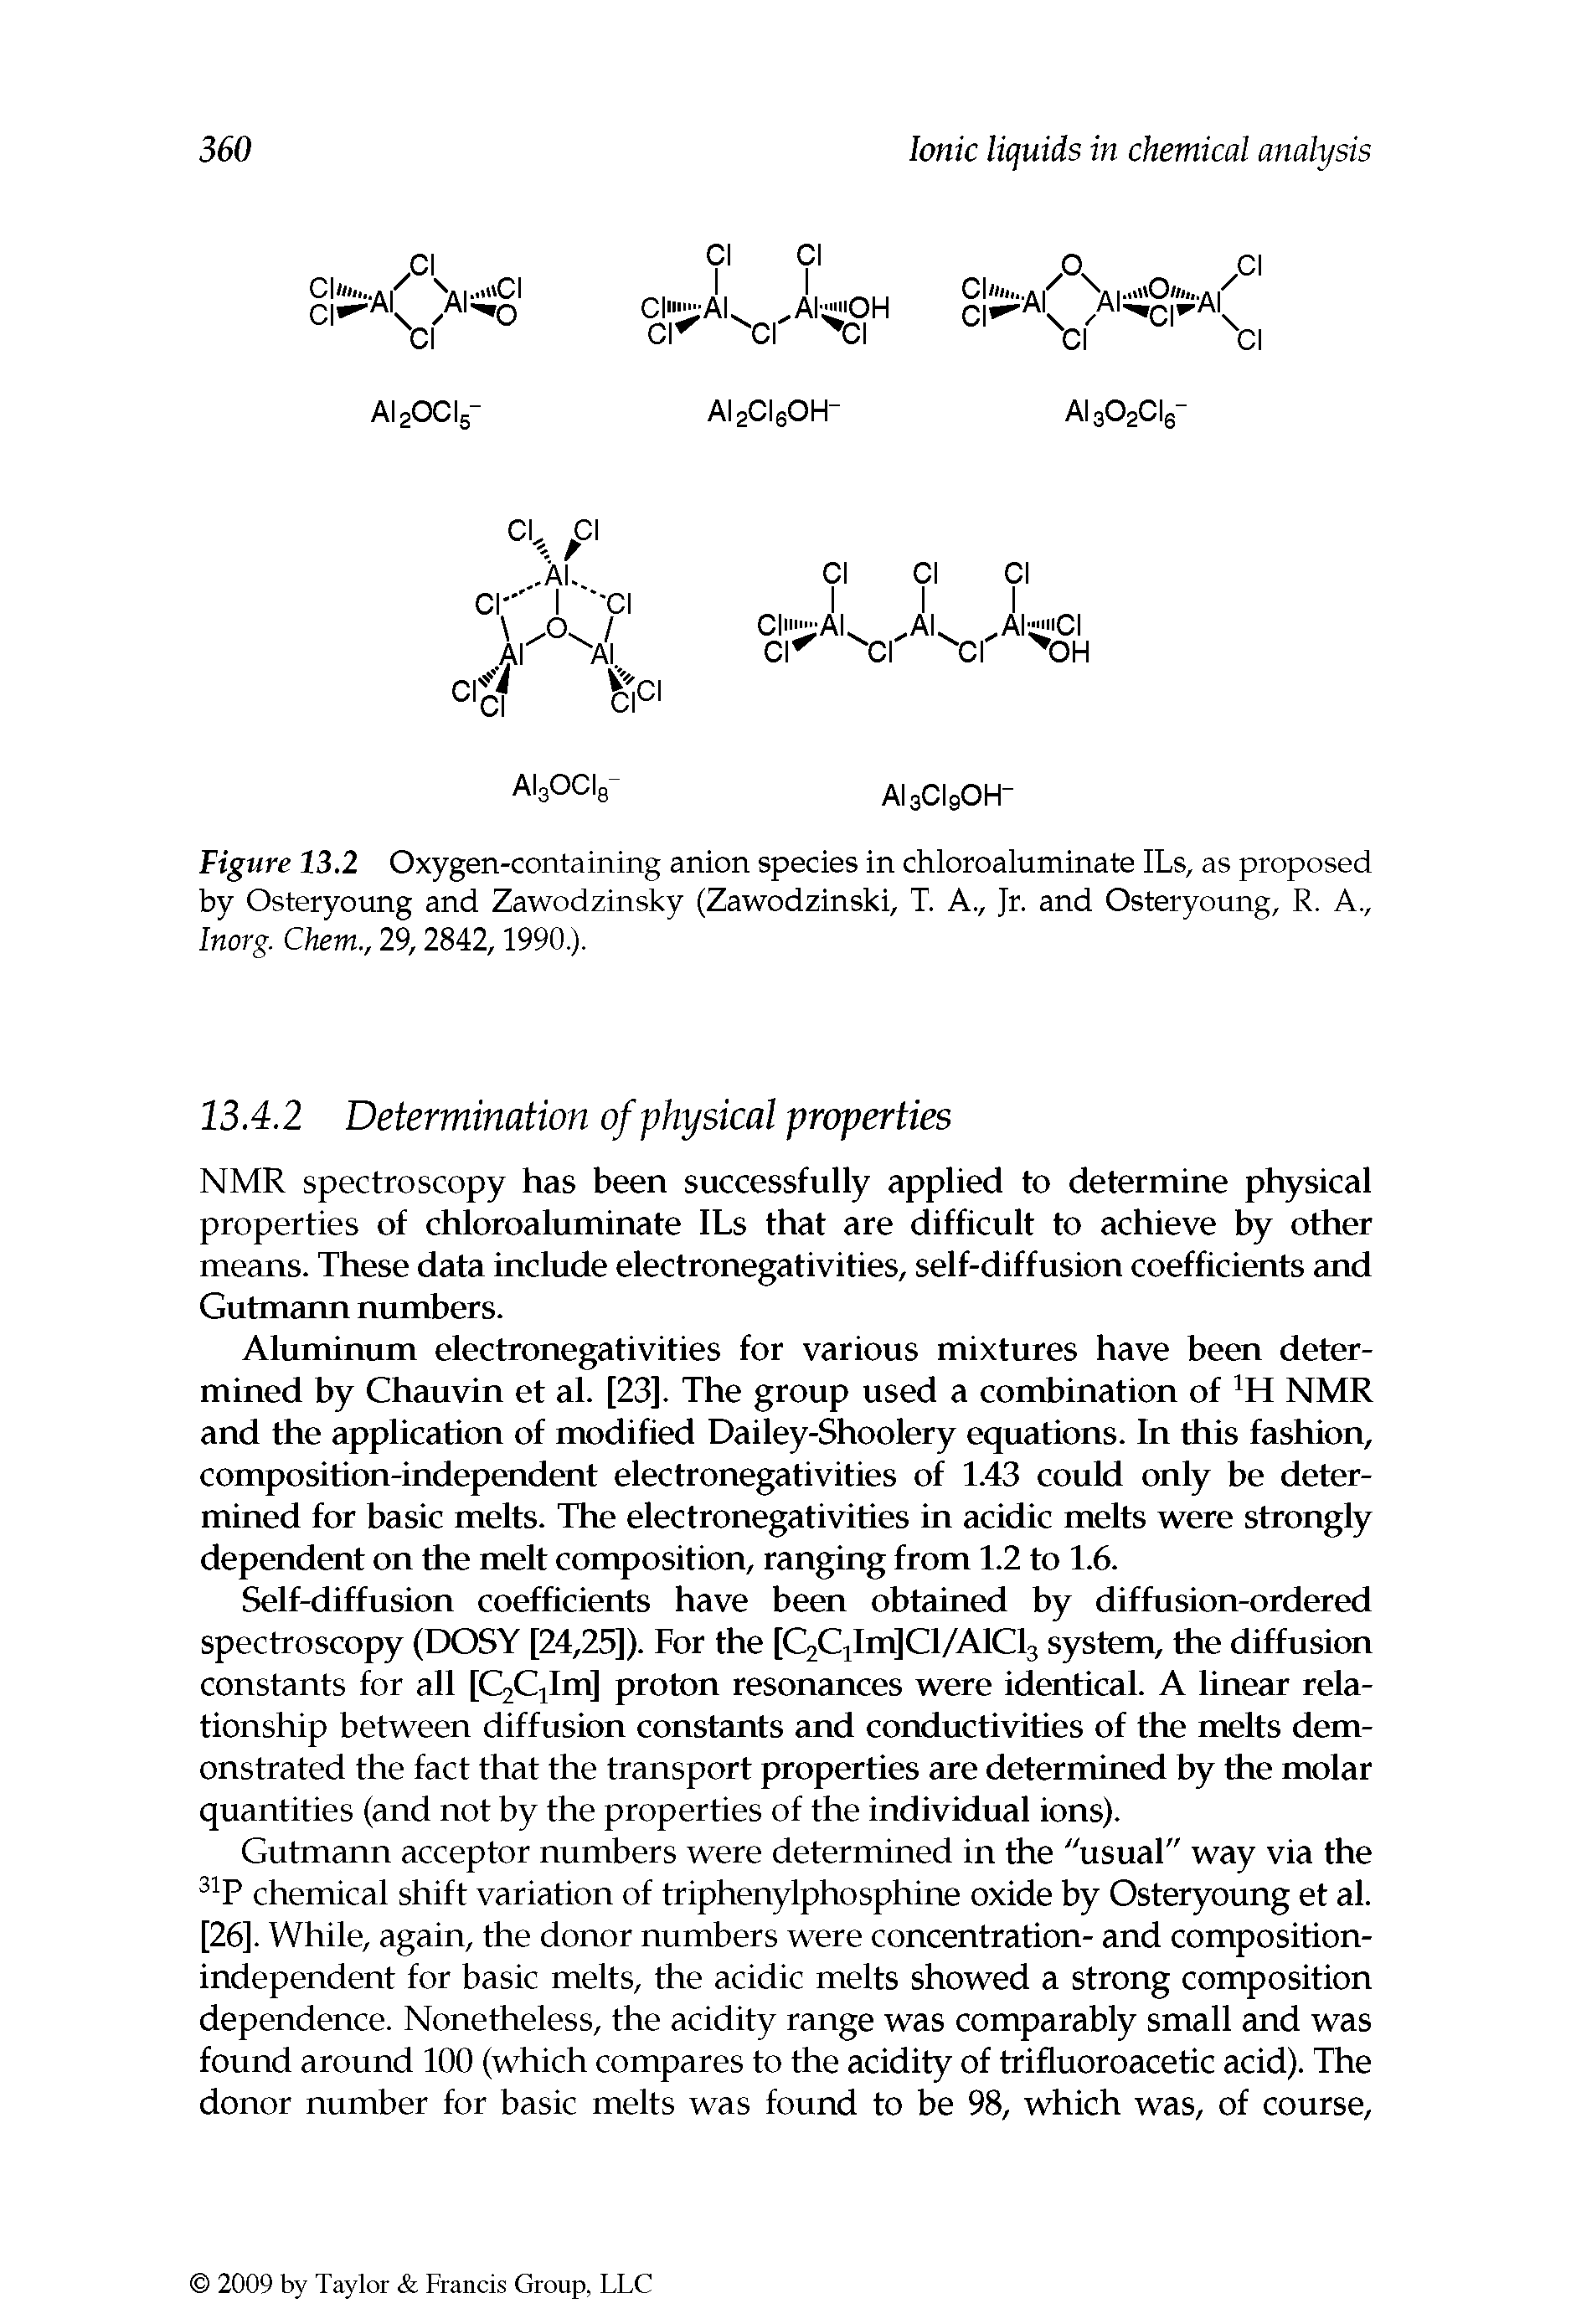 Figure 13.2 Oxygen-containing anion species in chloroaluminate ILs, as proposed by Osteryoung and Zawodzinsky (Zawodzinski, T. A., Jr. and Osteryoung, R. A., Inorg. Chem., 29,2842,1990.).